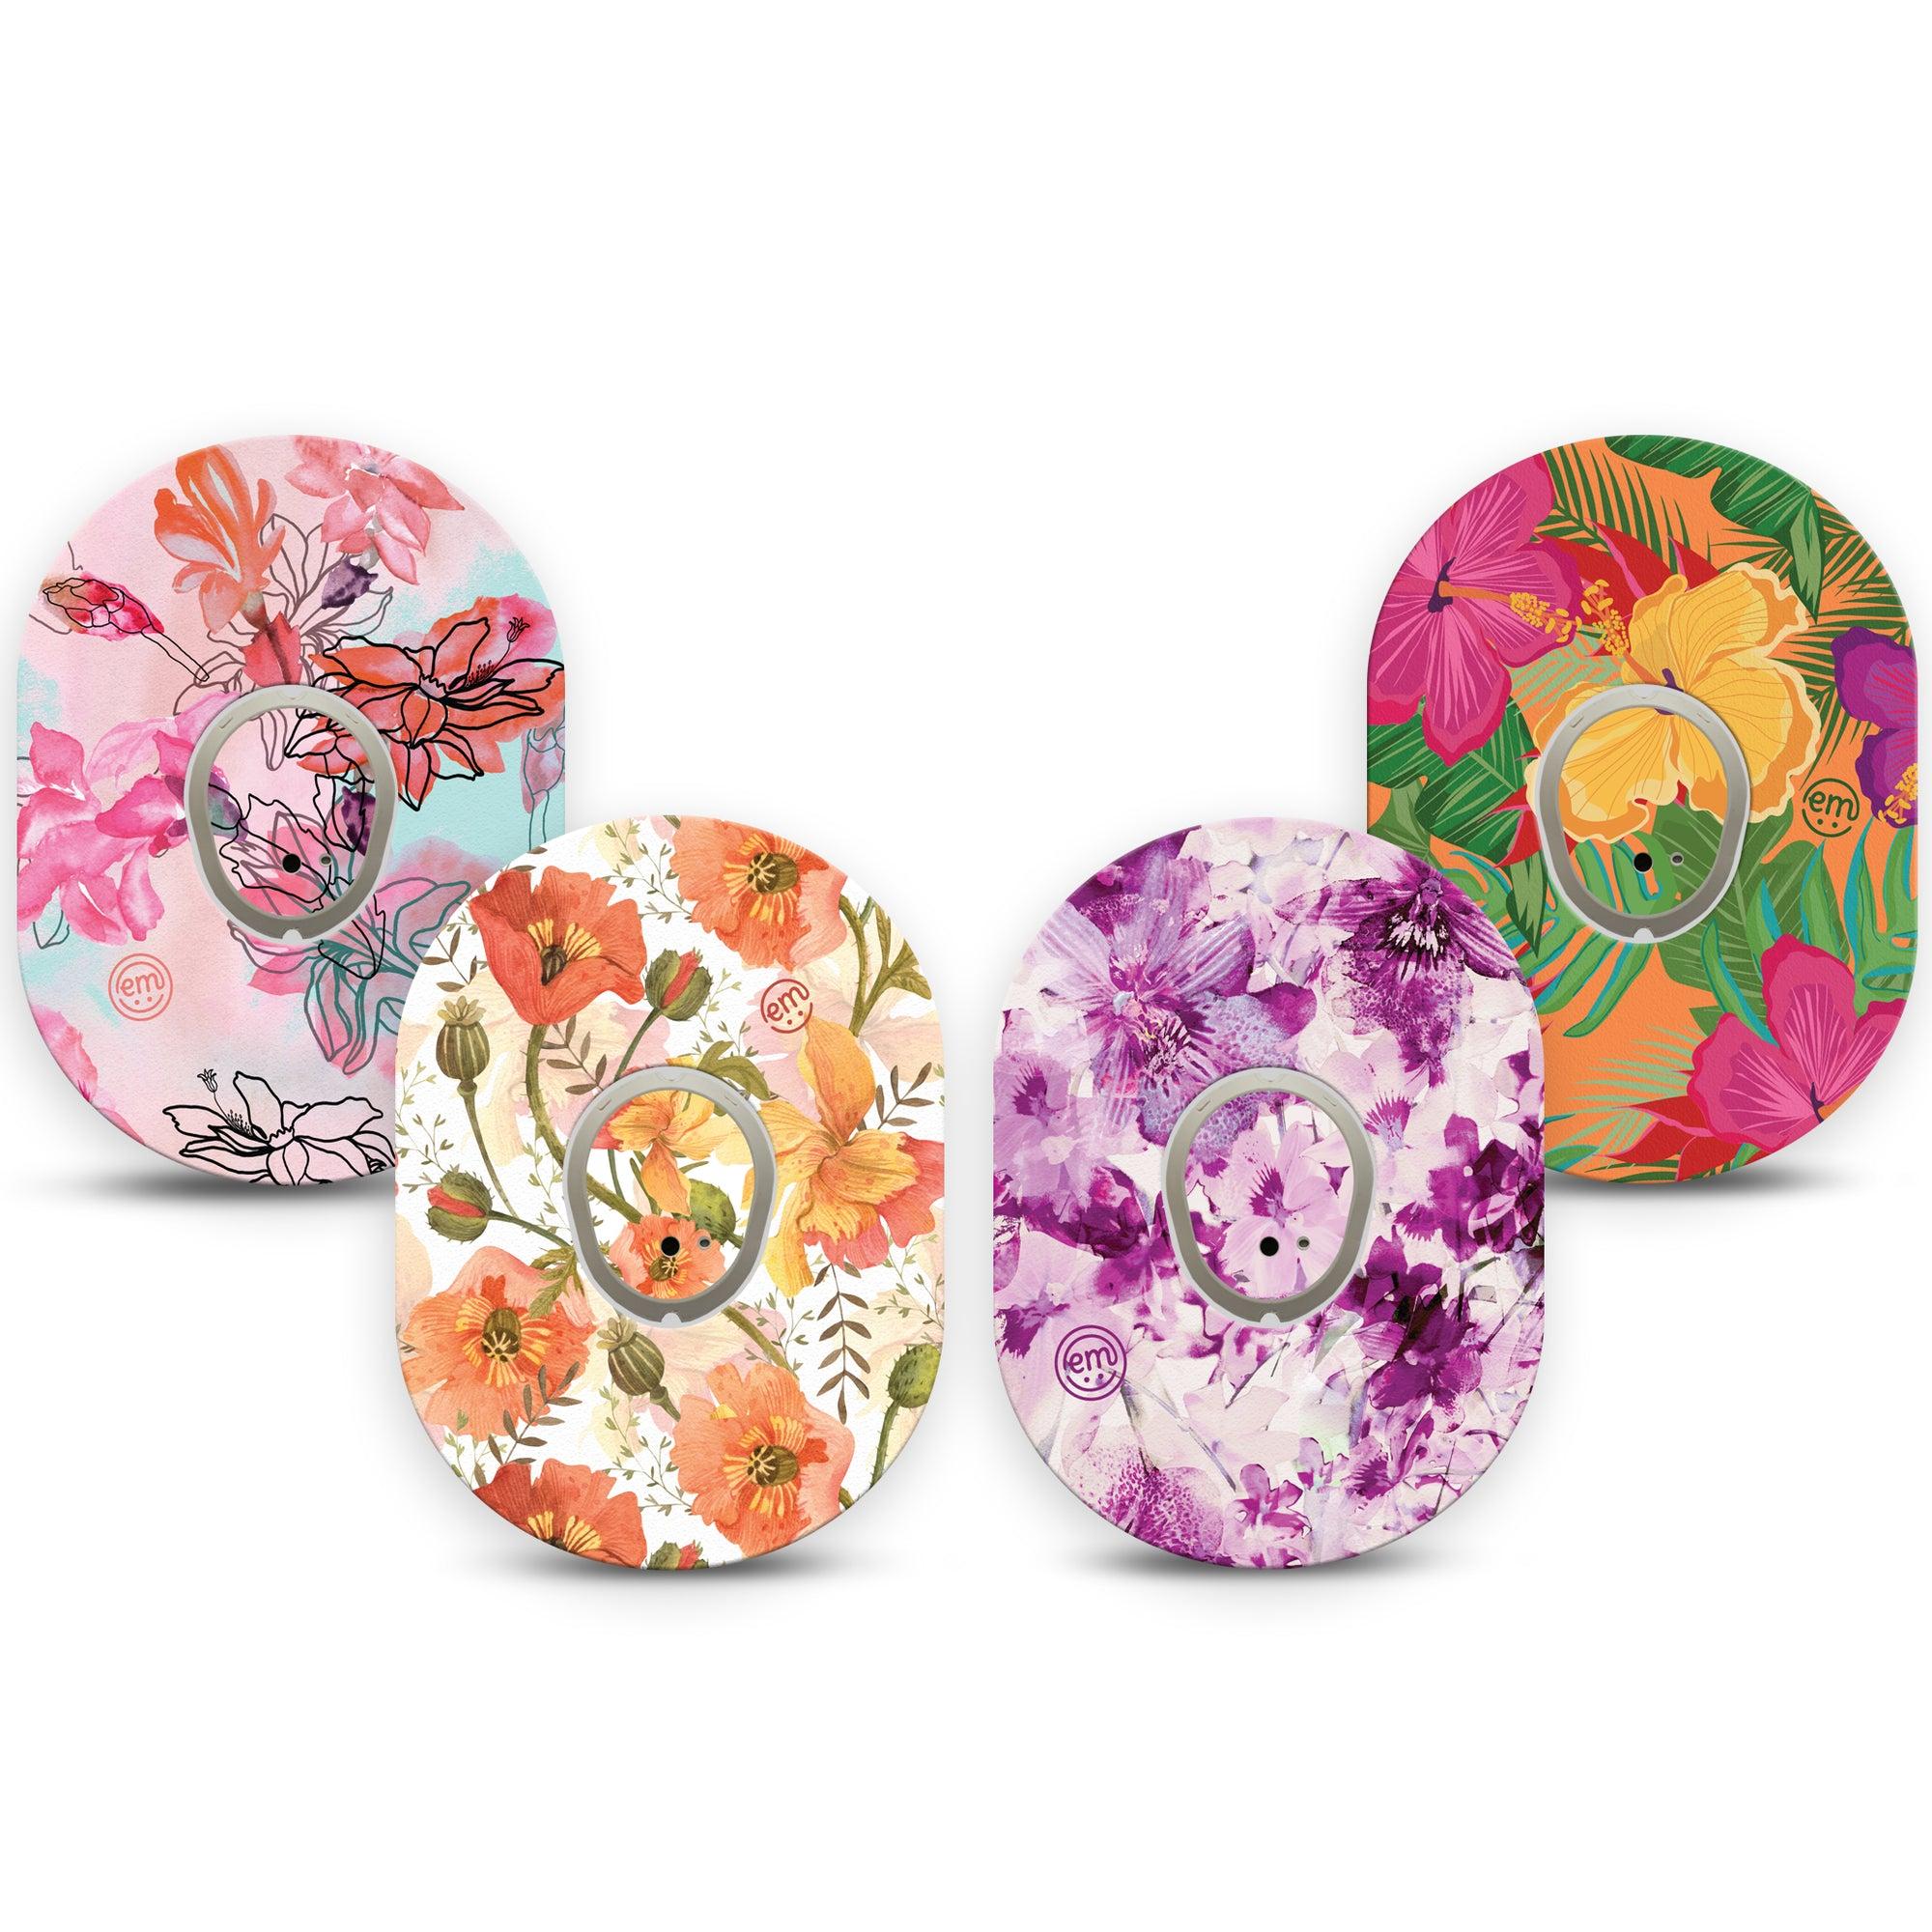 Cheerful Floral Variety Pack Dexcom G7 Transmitter Sticker, 4-Pack, Spring Colorful Florals Themed, Dexcom G7 Transmitter Vinyl Sticker, With Matching Dexcom G7 Tapes, CGM Adhesive Patch Design